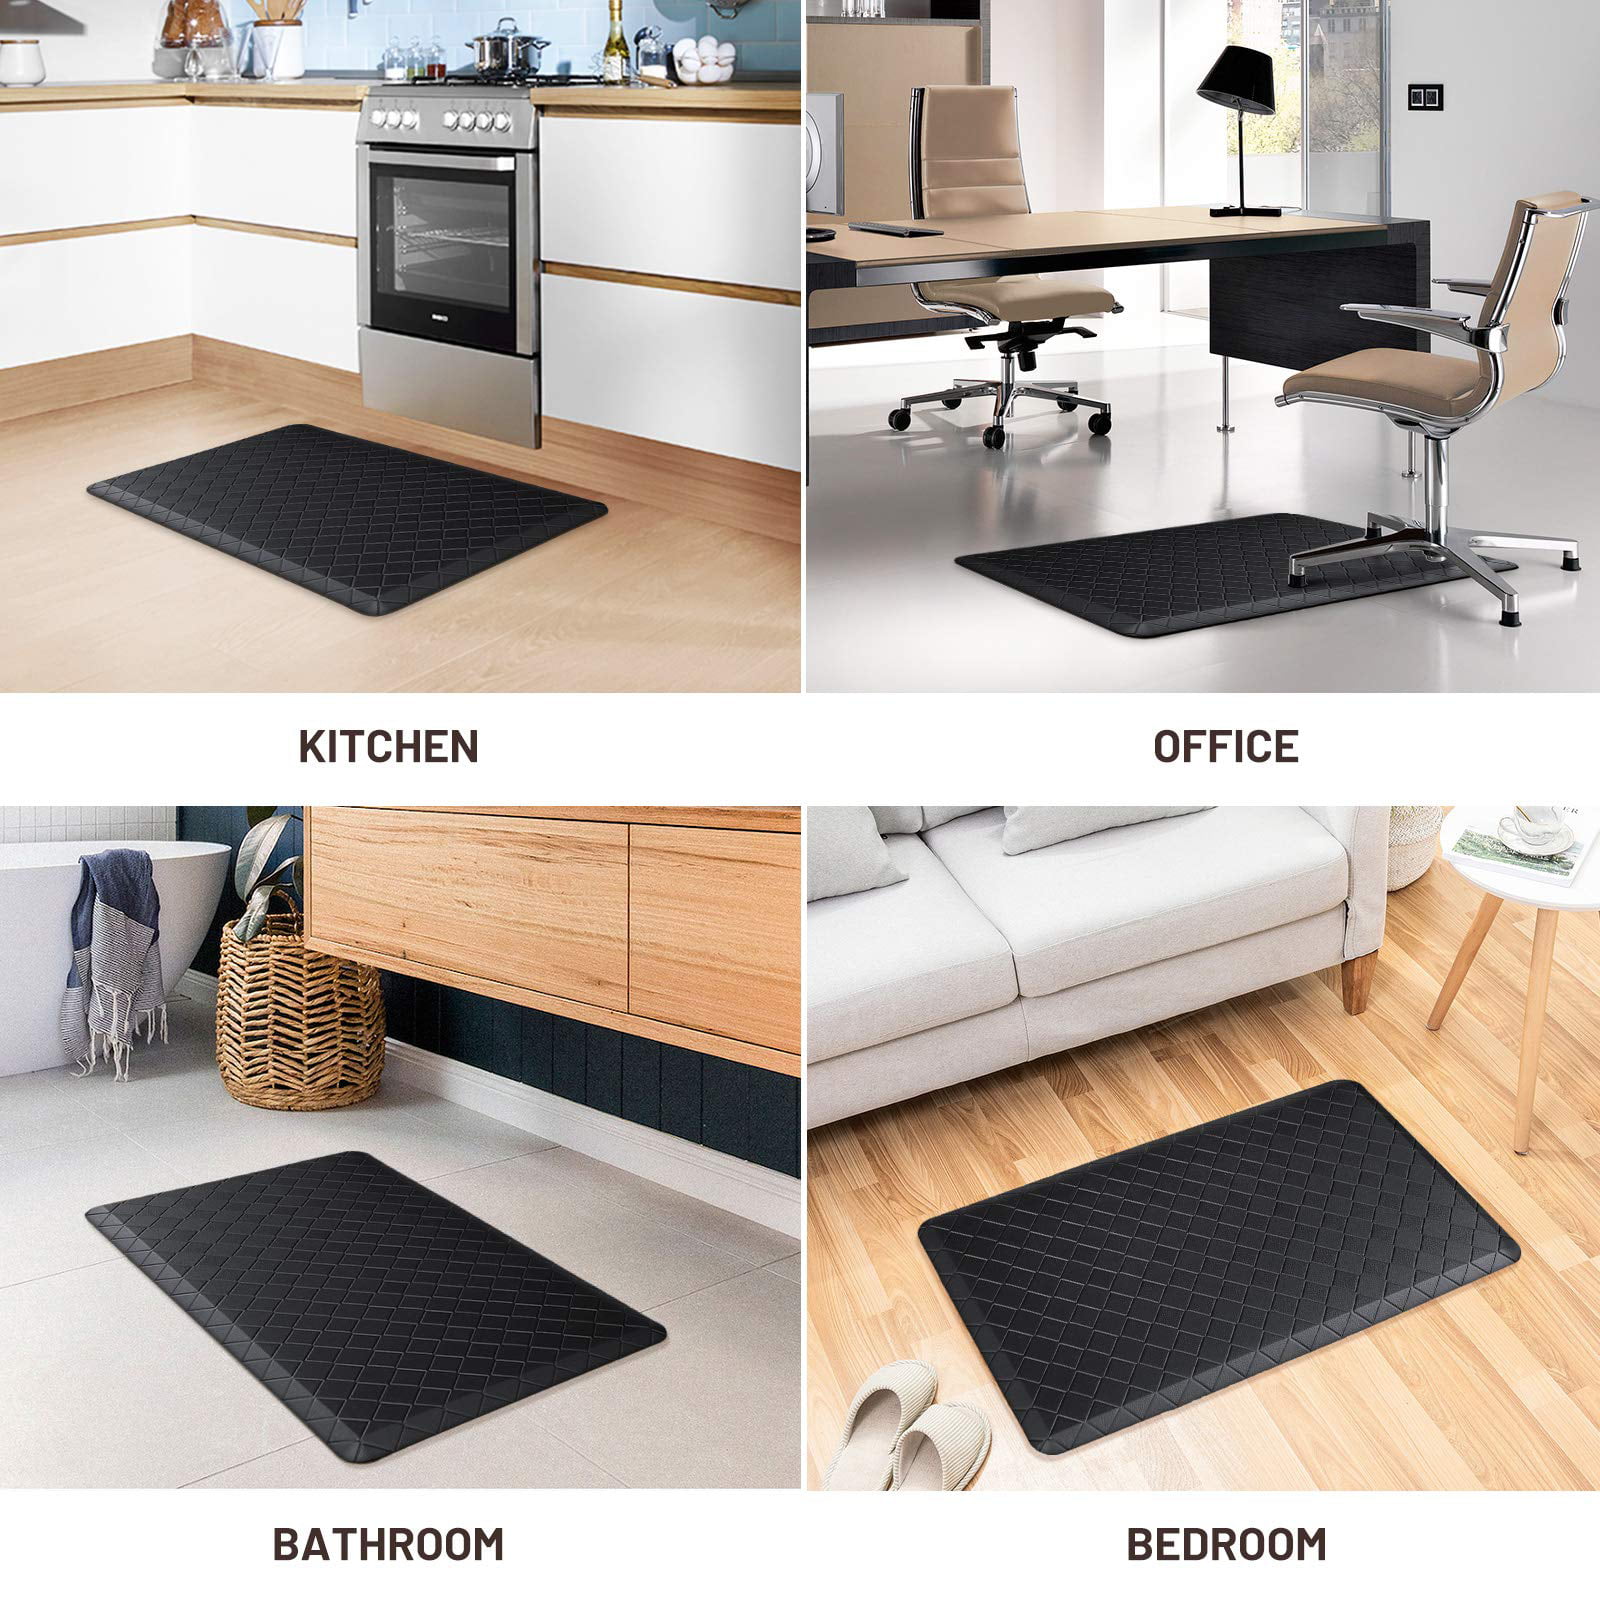 HappyTrends Kitchen Mat Cushioned Anti-Fatigue Kitchen Rug,17.3x 28,Thick  Waterproof Non-Slip Kitchen Mats and Rugs Heavy Duty PVC Ergonomic Comfort  Rug for Kitchen,Floor,Office,Sink,Laundry,Black 